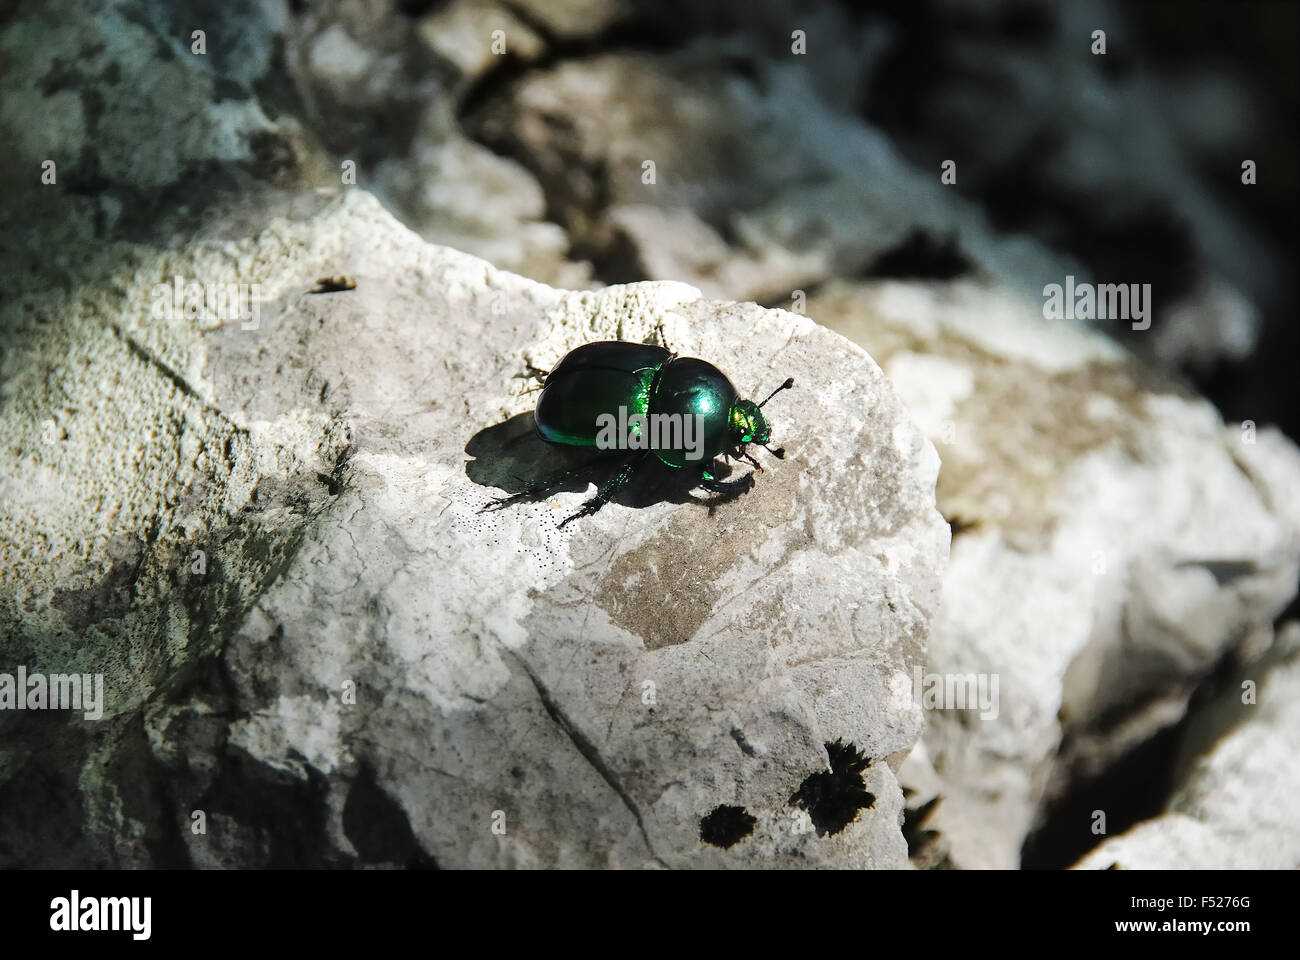 Cetonia aurata photographed on Mount Krn, Slovenia. Cetonia Aurata, called the rose chafer or the green rose chafer, is a beetle, 20 mm (¾ in) long, that has a metallic structurally coloured green and a distinct V-shaped scutellum. Stock Photo